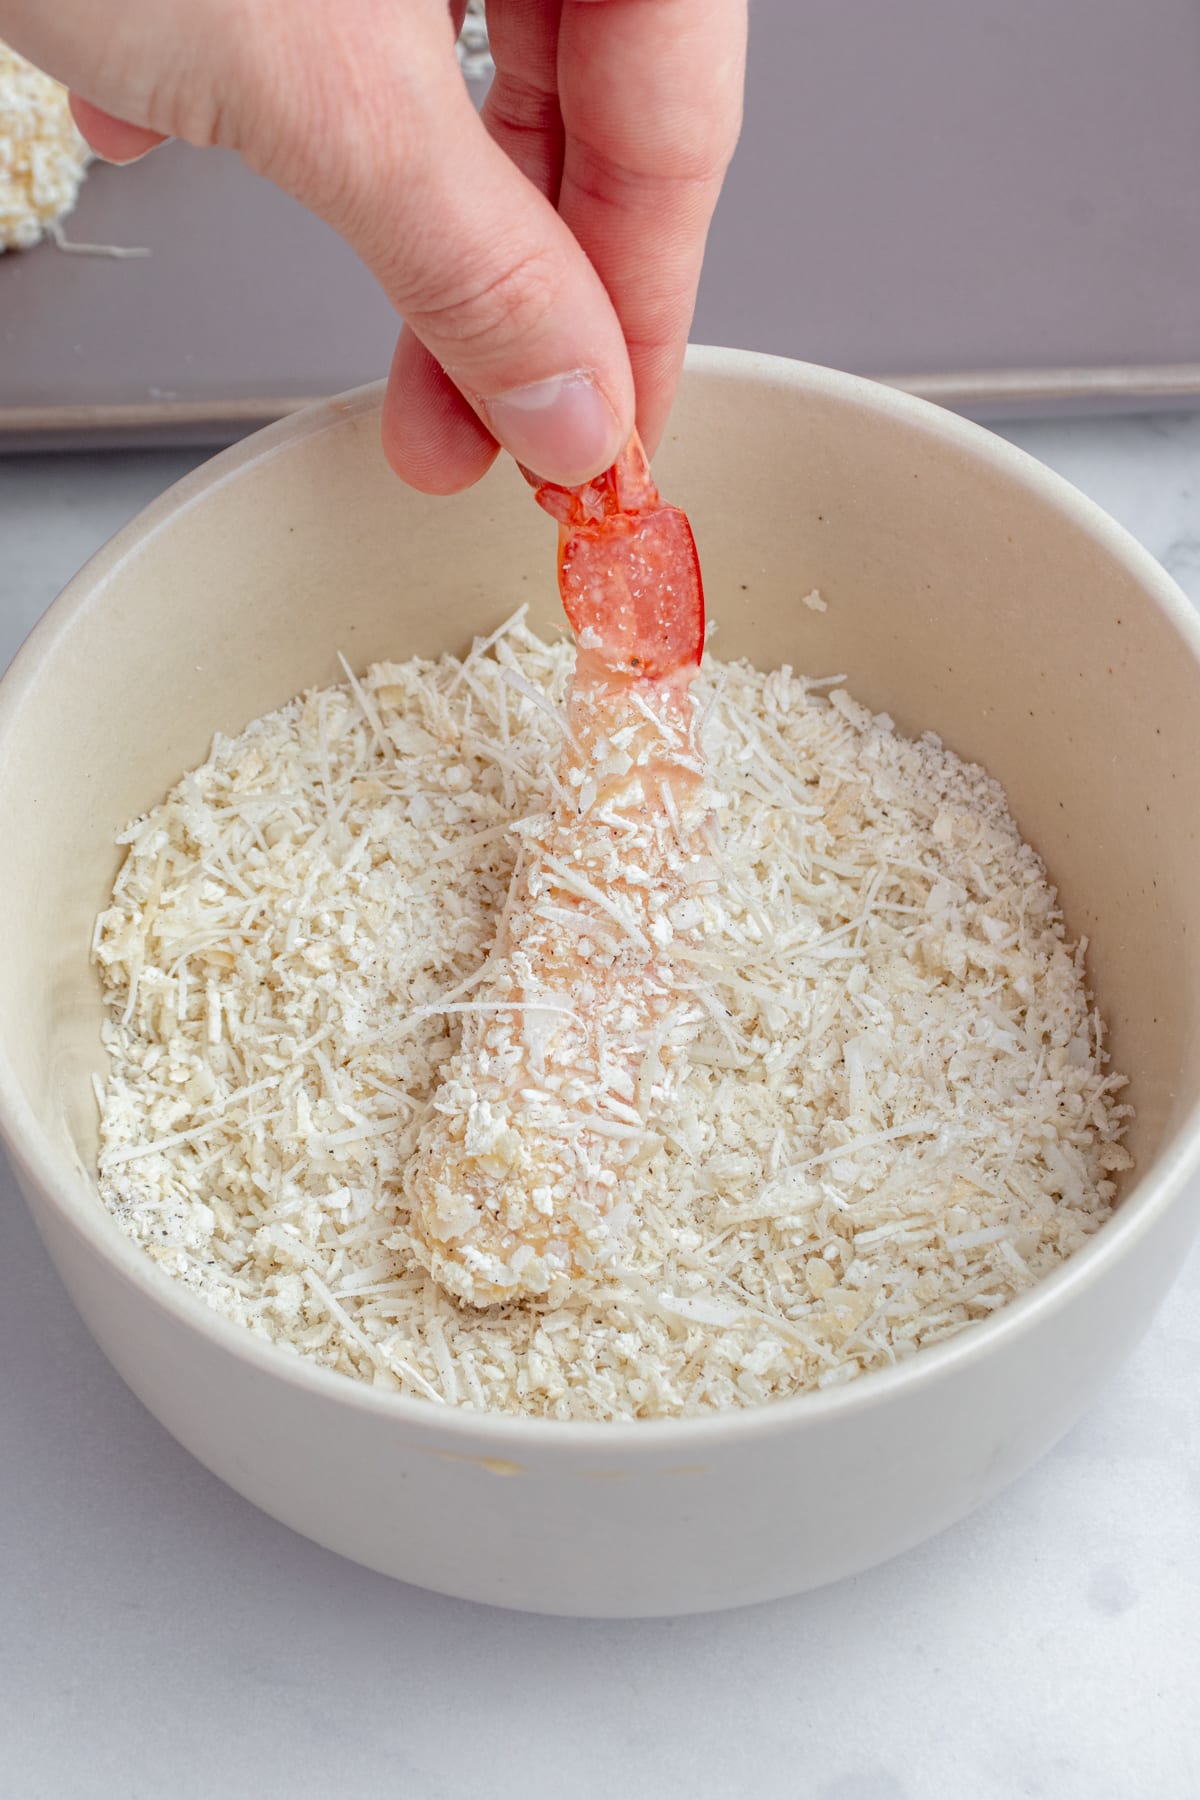 Shrimp being coated with shredded coconut.